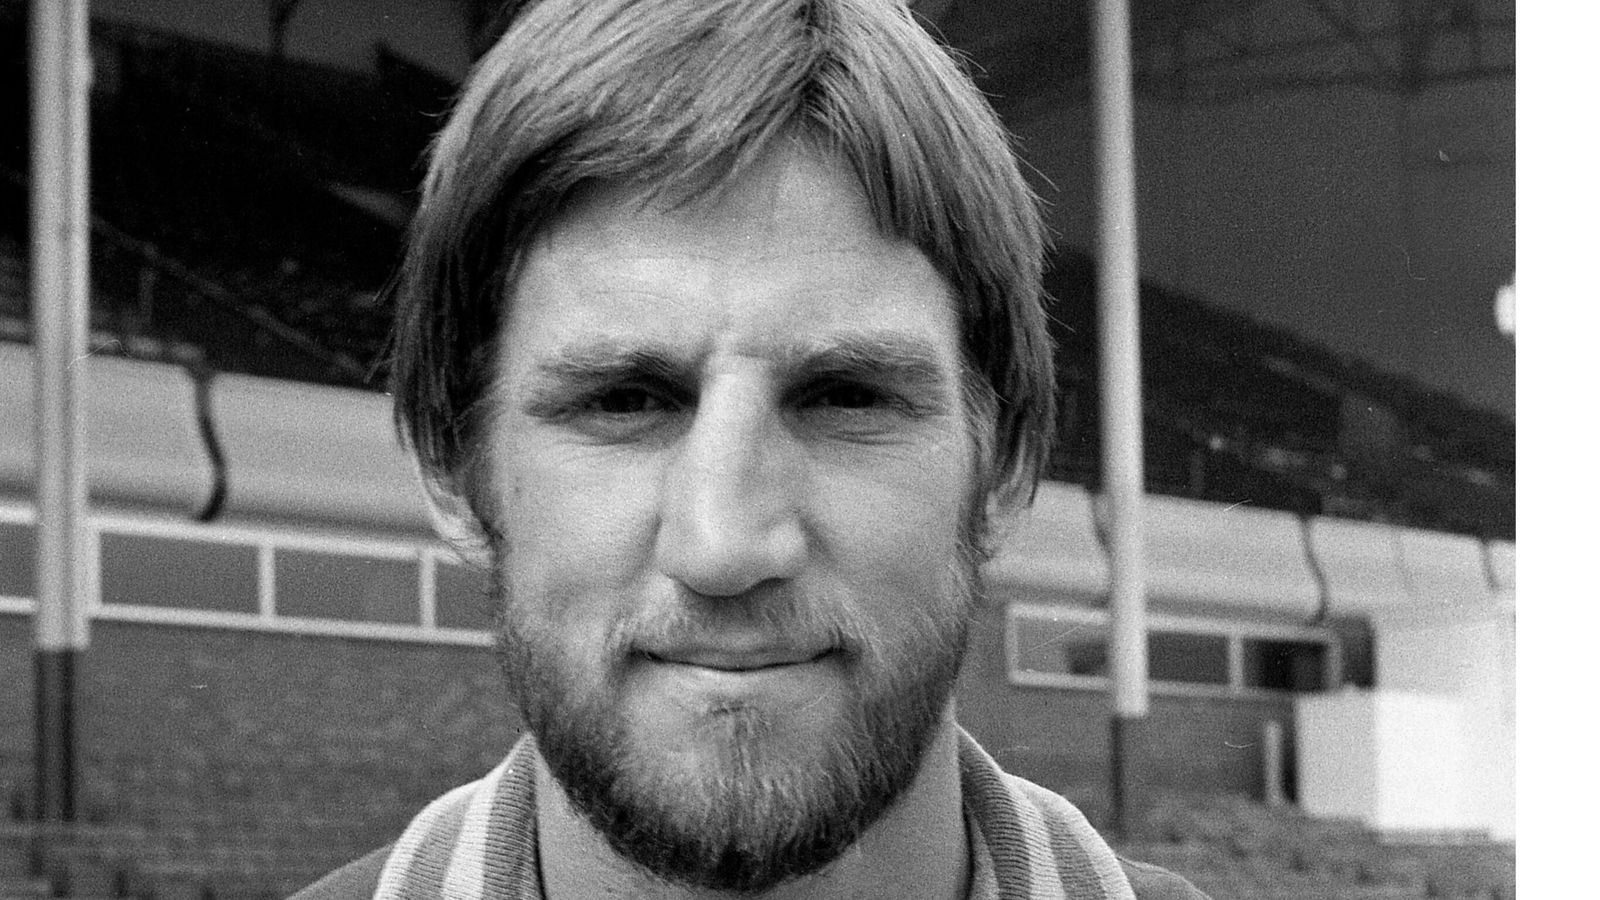 tributes paid to former footballer chris nicholl, who has died following dementia battle